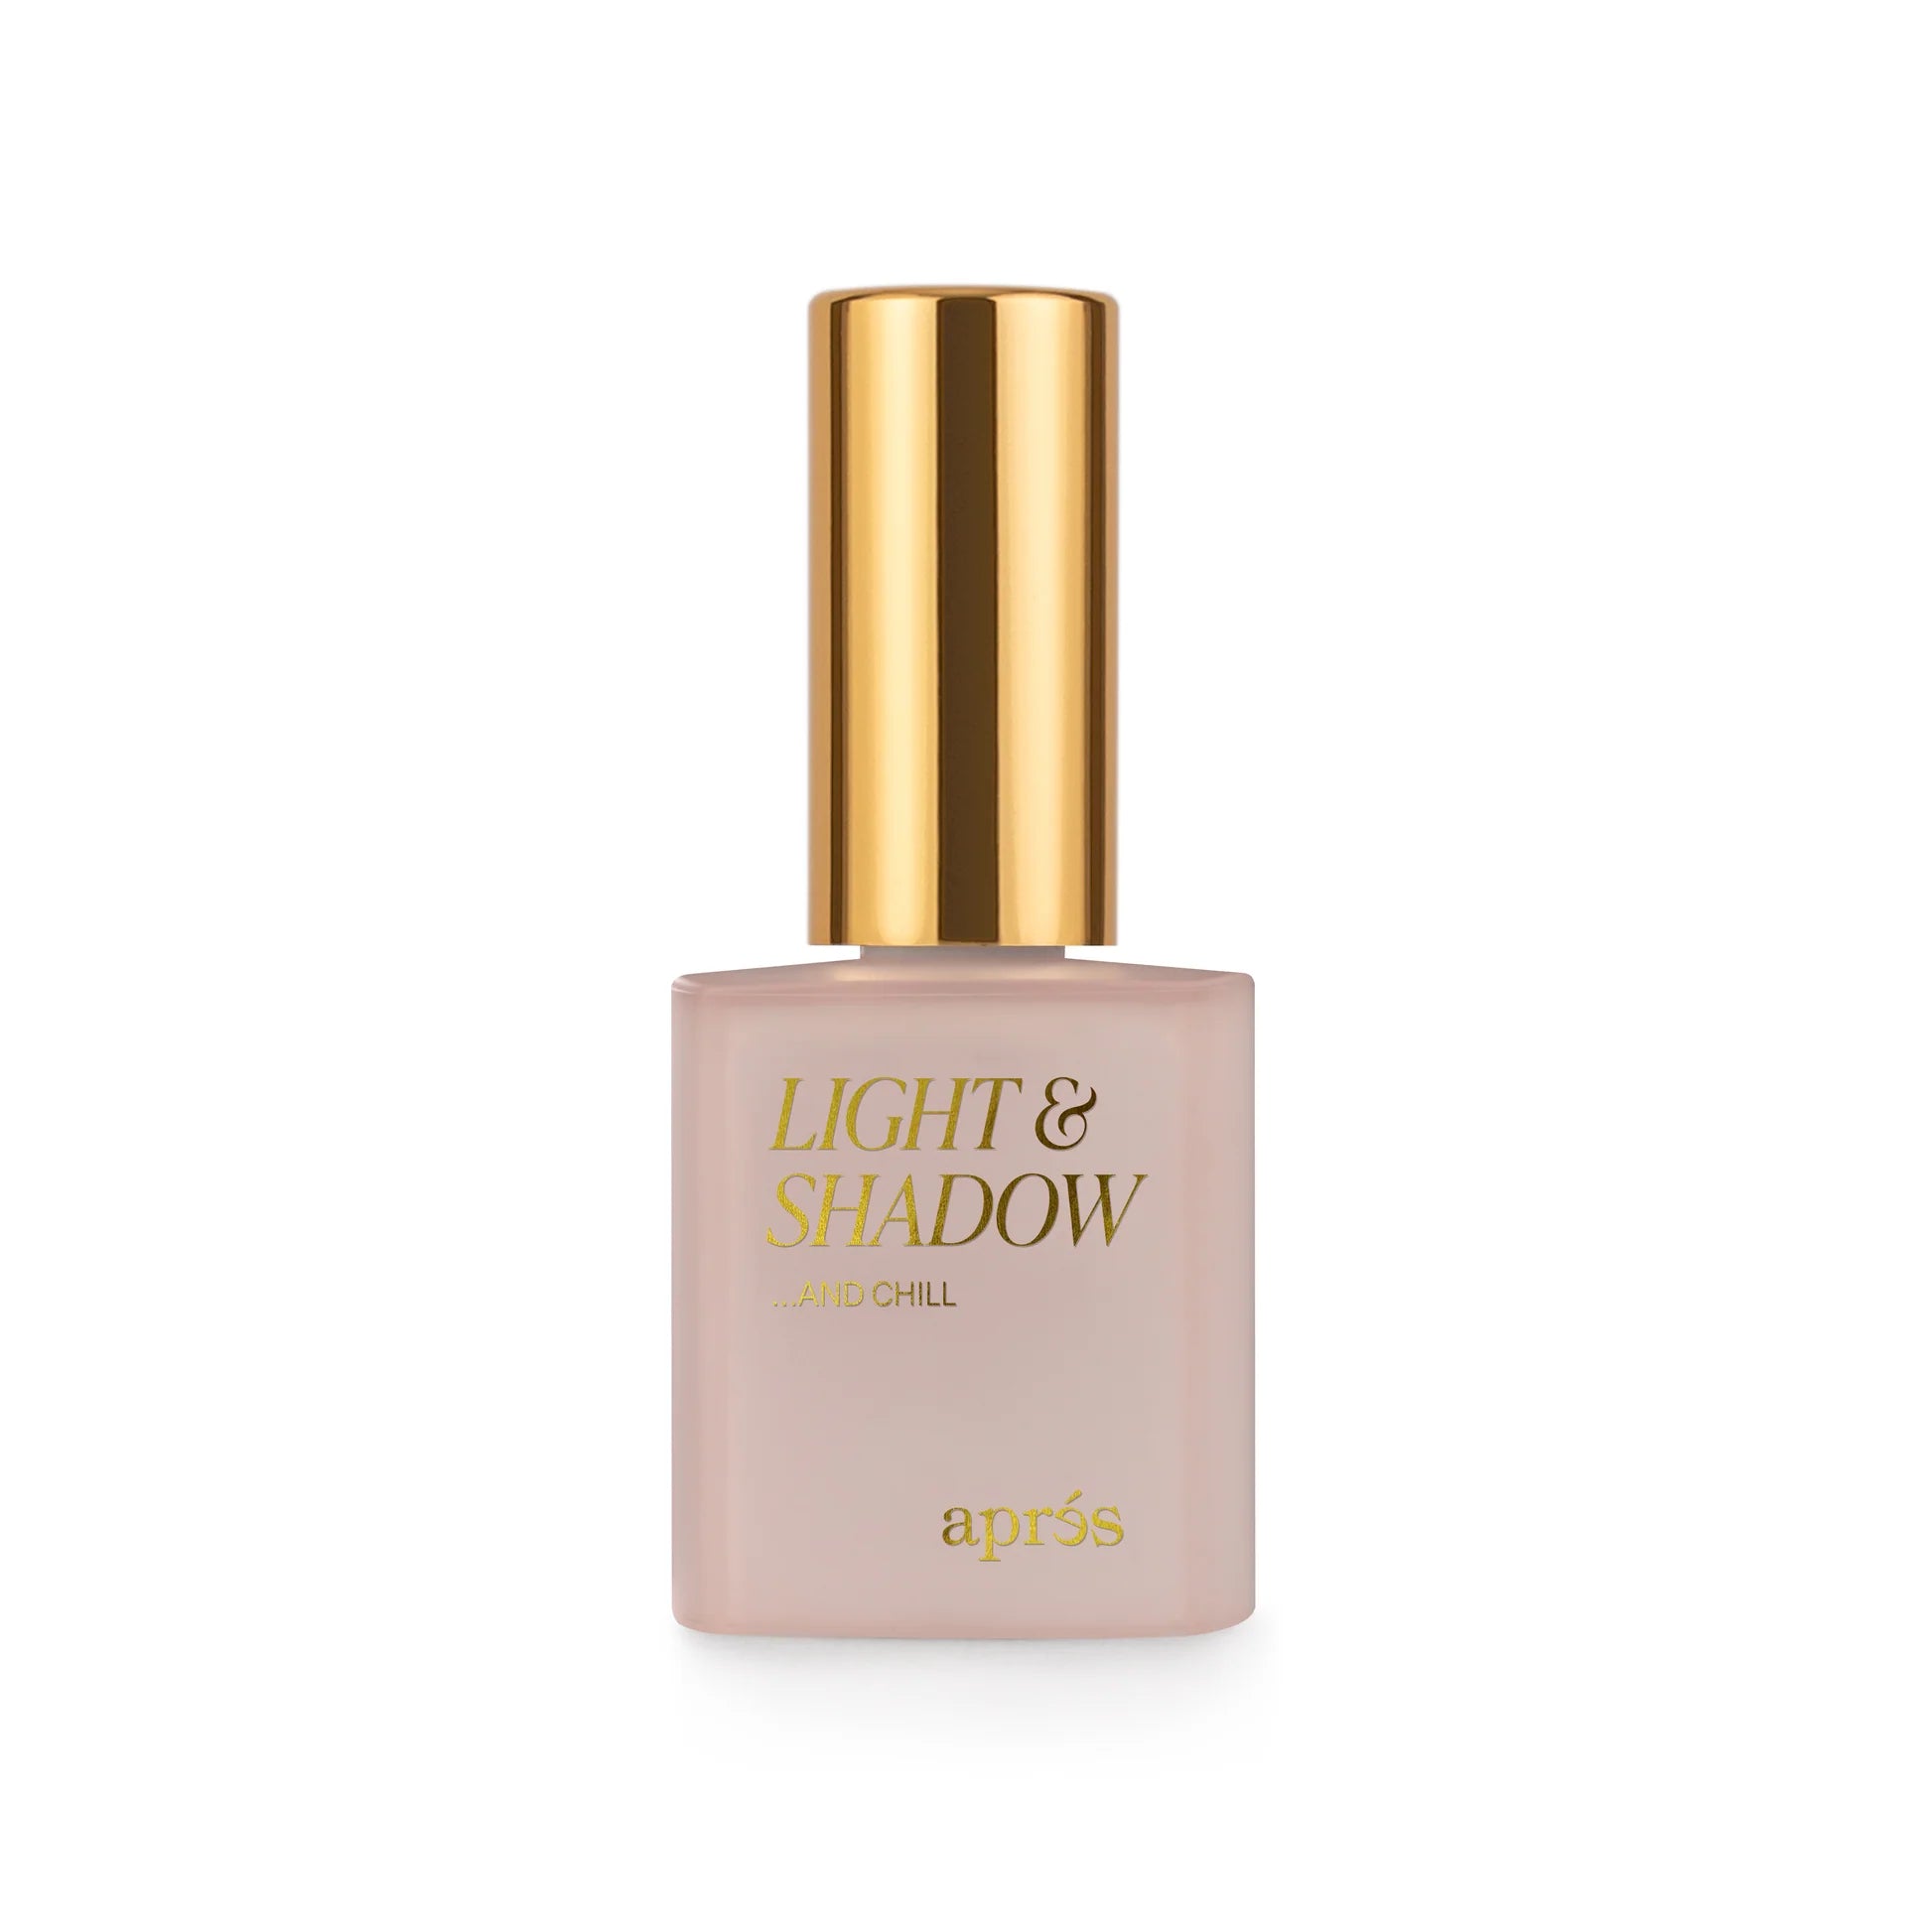 404 ...And Chill Light & Shadow Sheer Gel Couleur by Apres